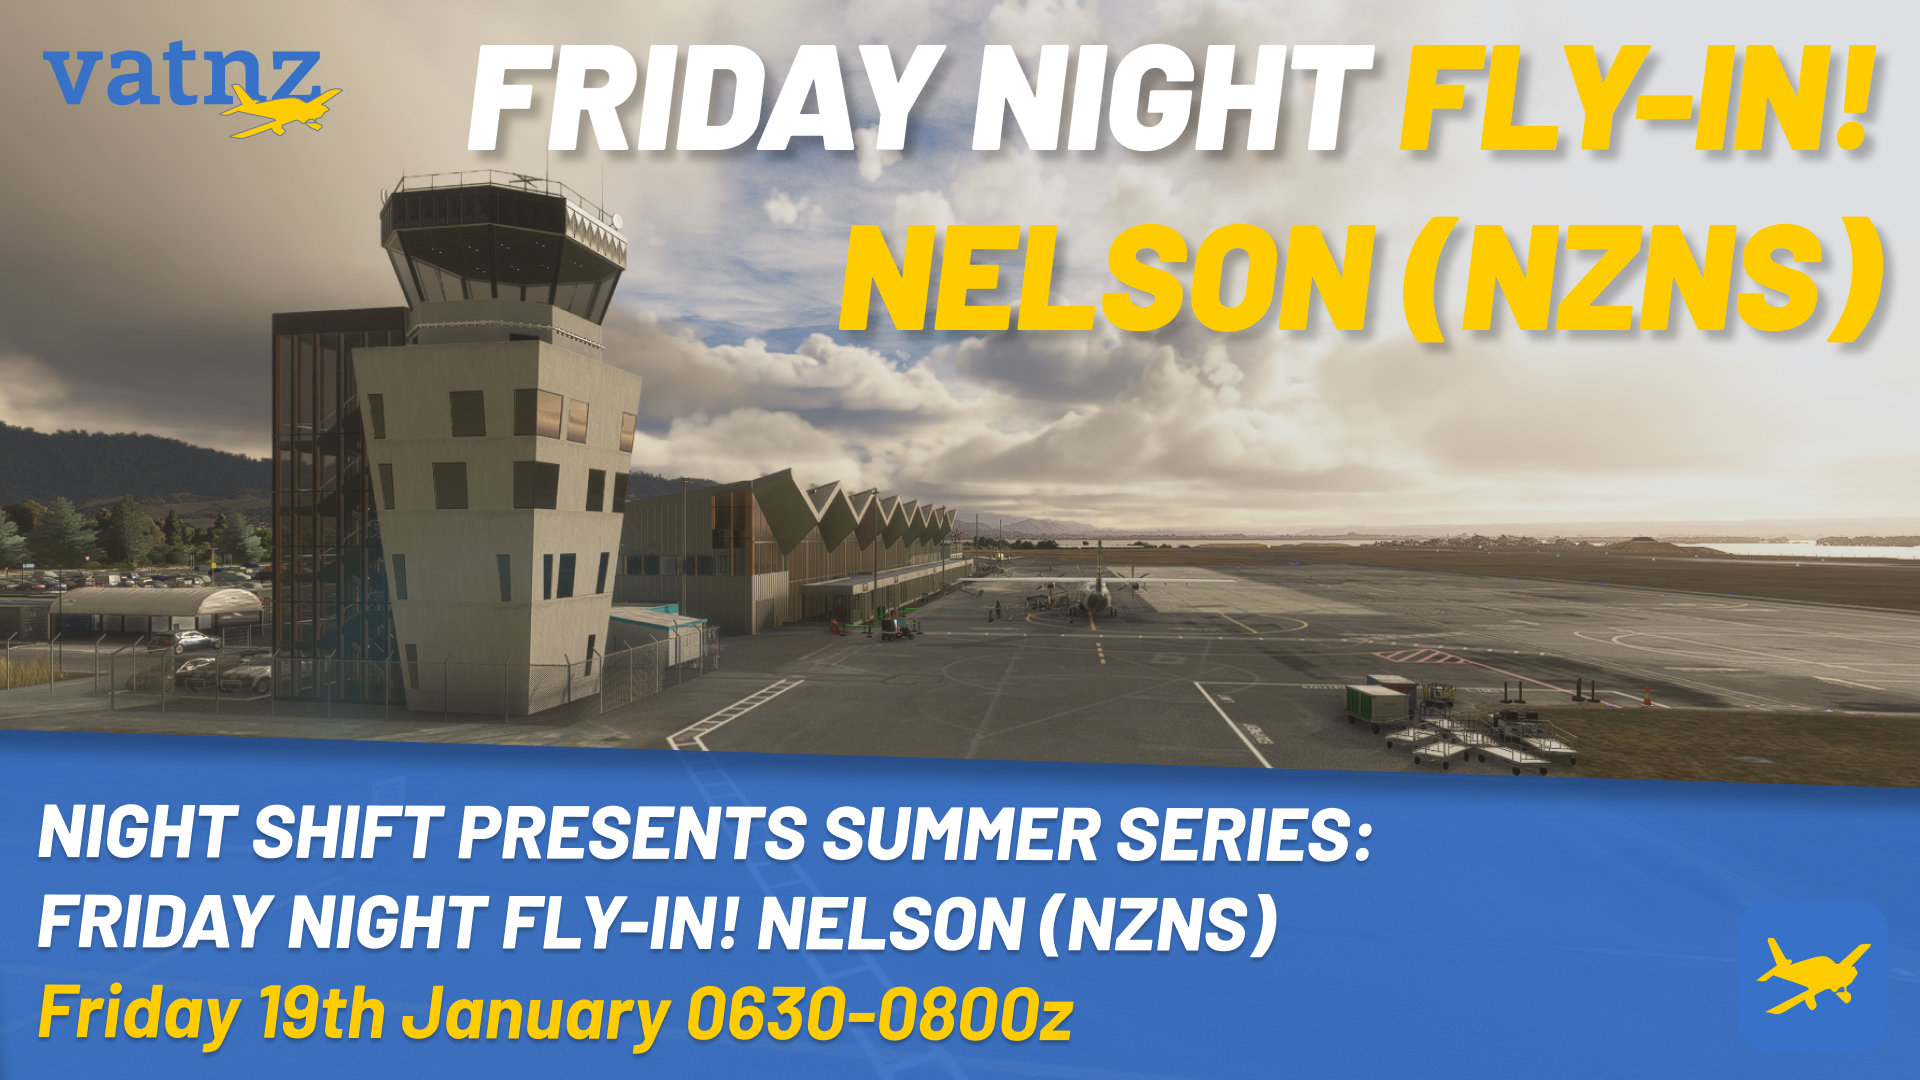 Night Shift Summer Series Presents: Friday Night Fly-in! Nelson